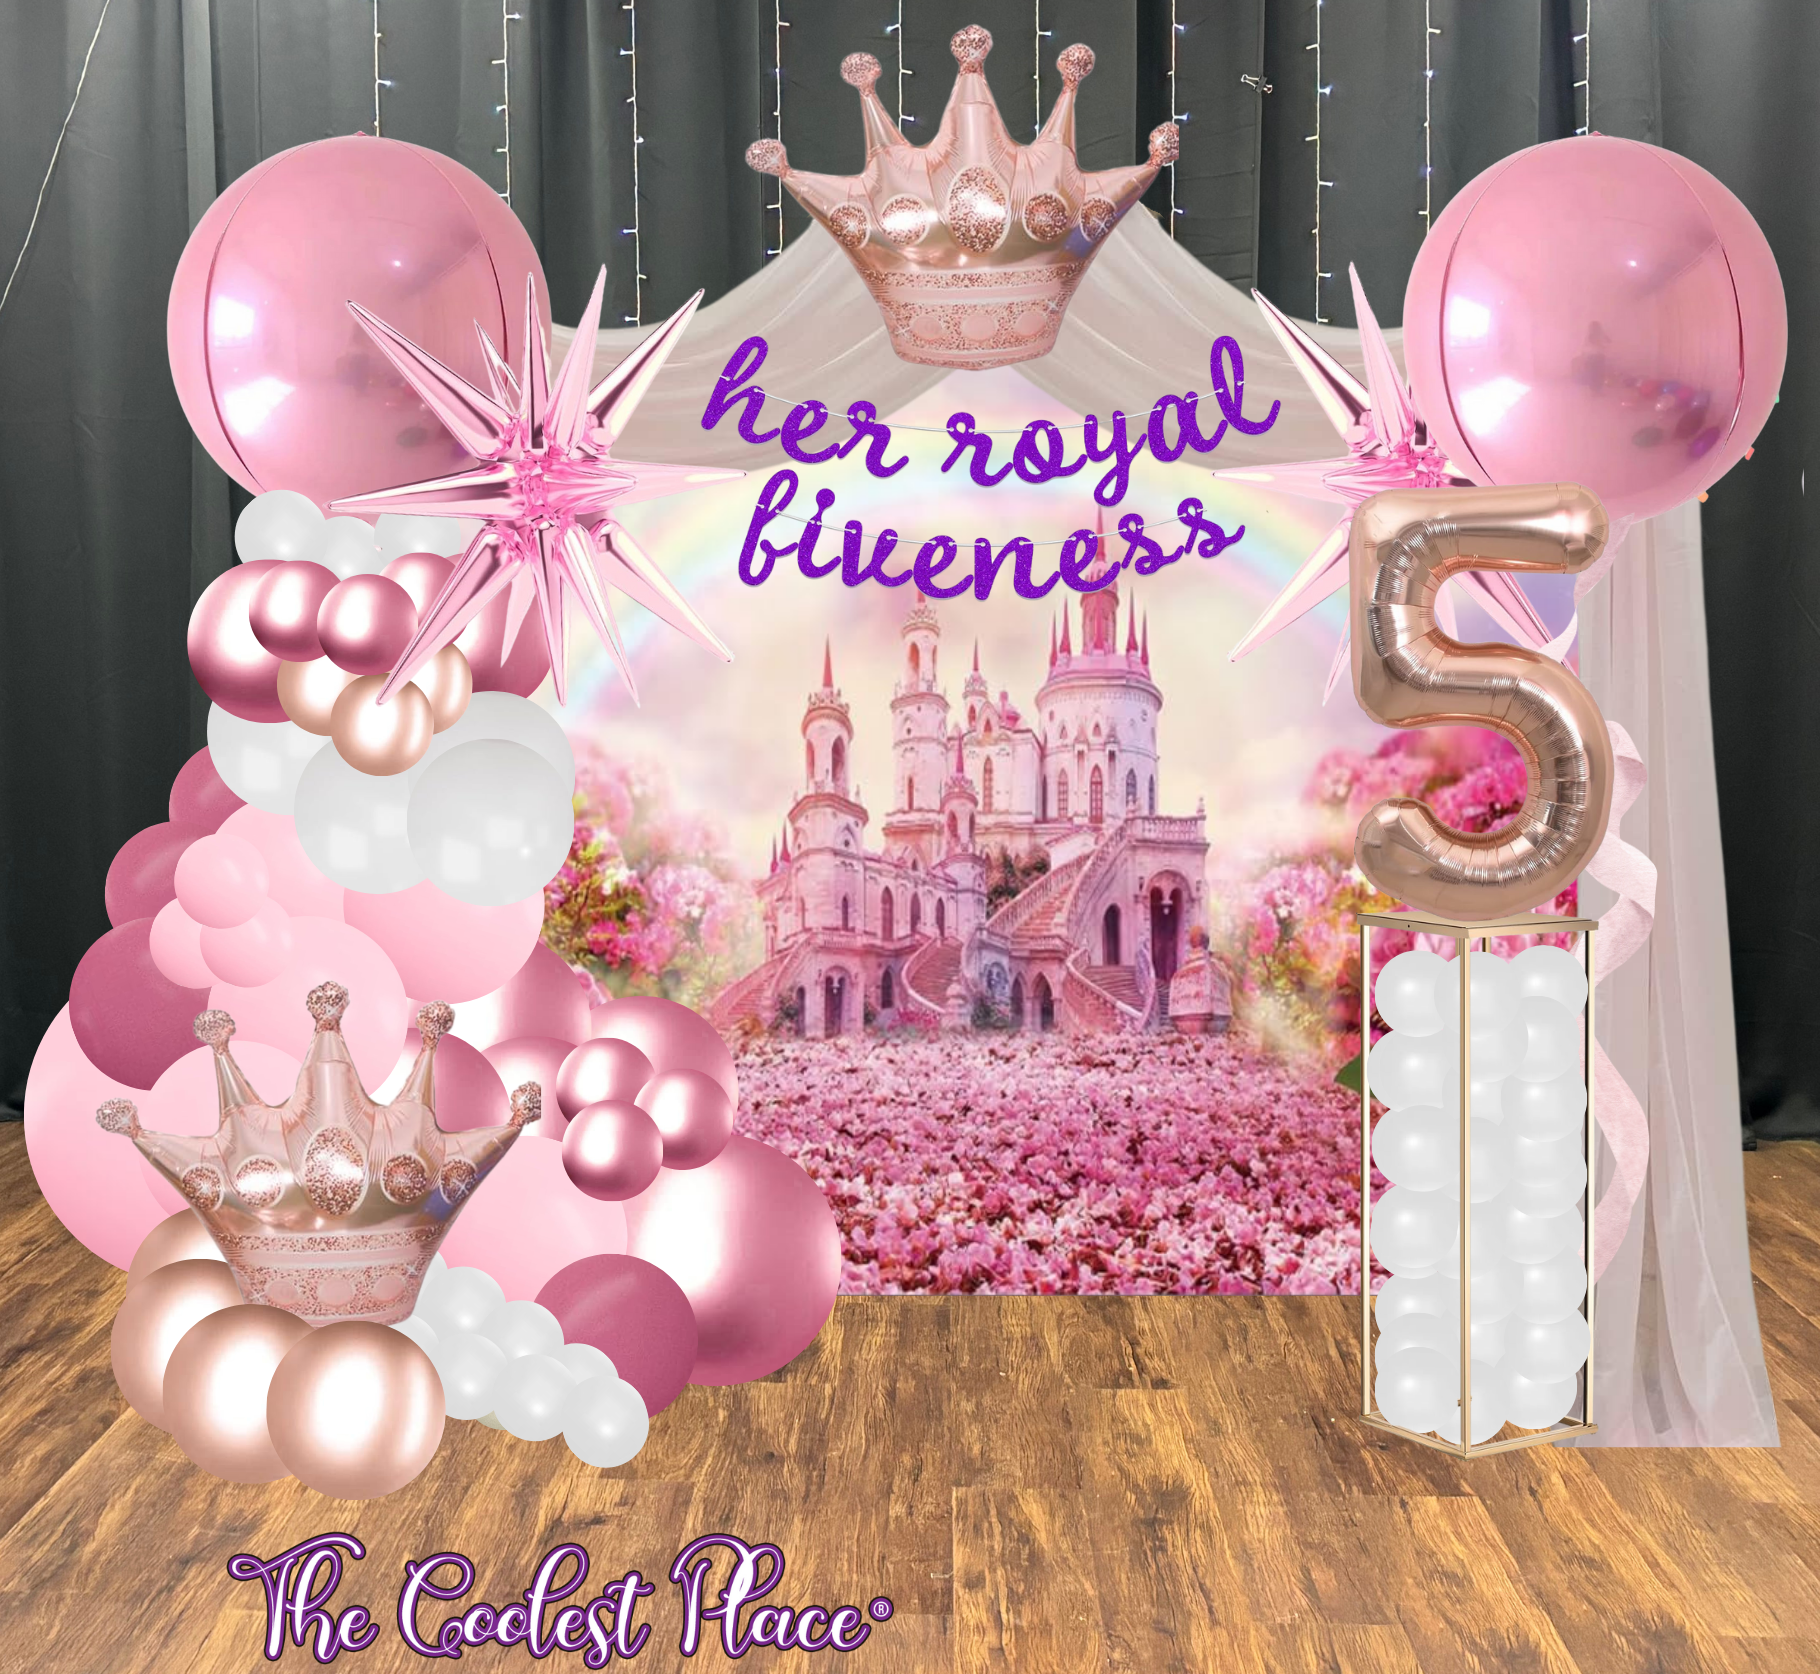 Royal Fiveness Party Decor Setup with Pink balloon arrangements and crown balloons